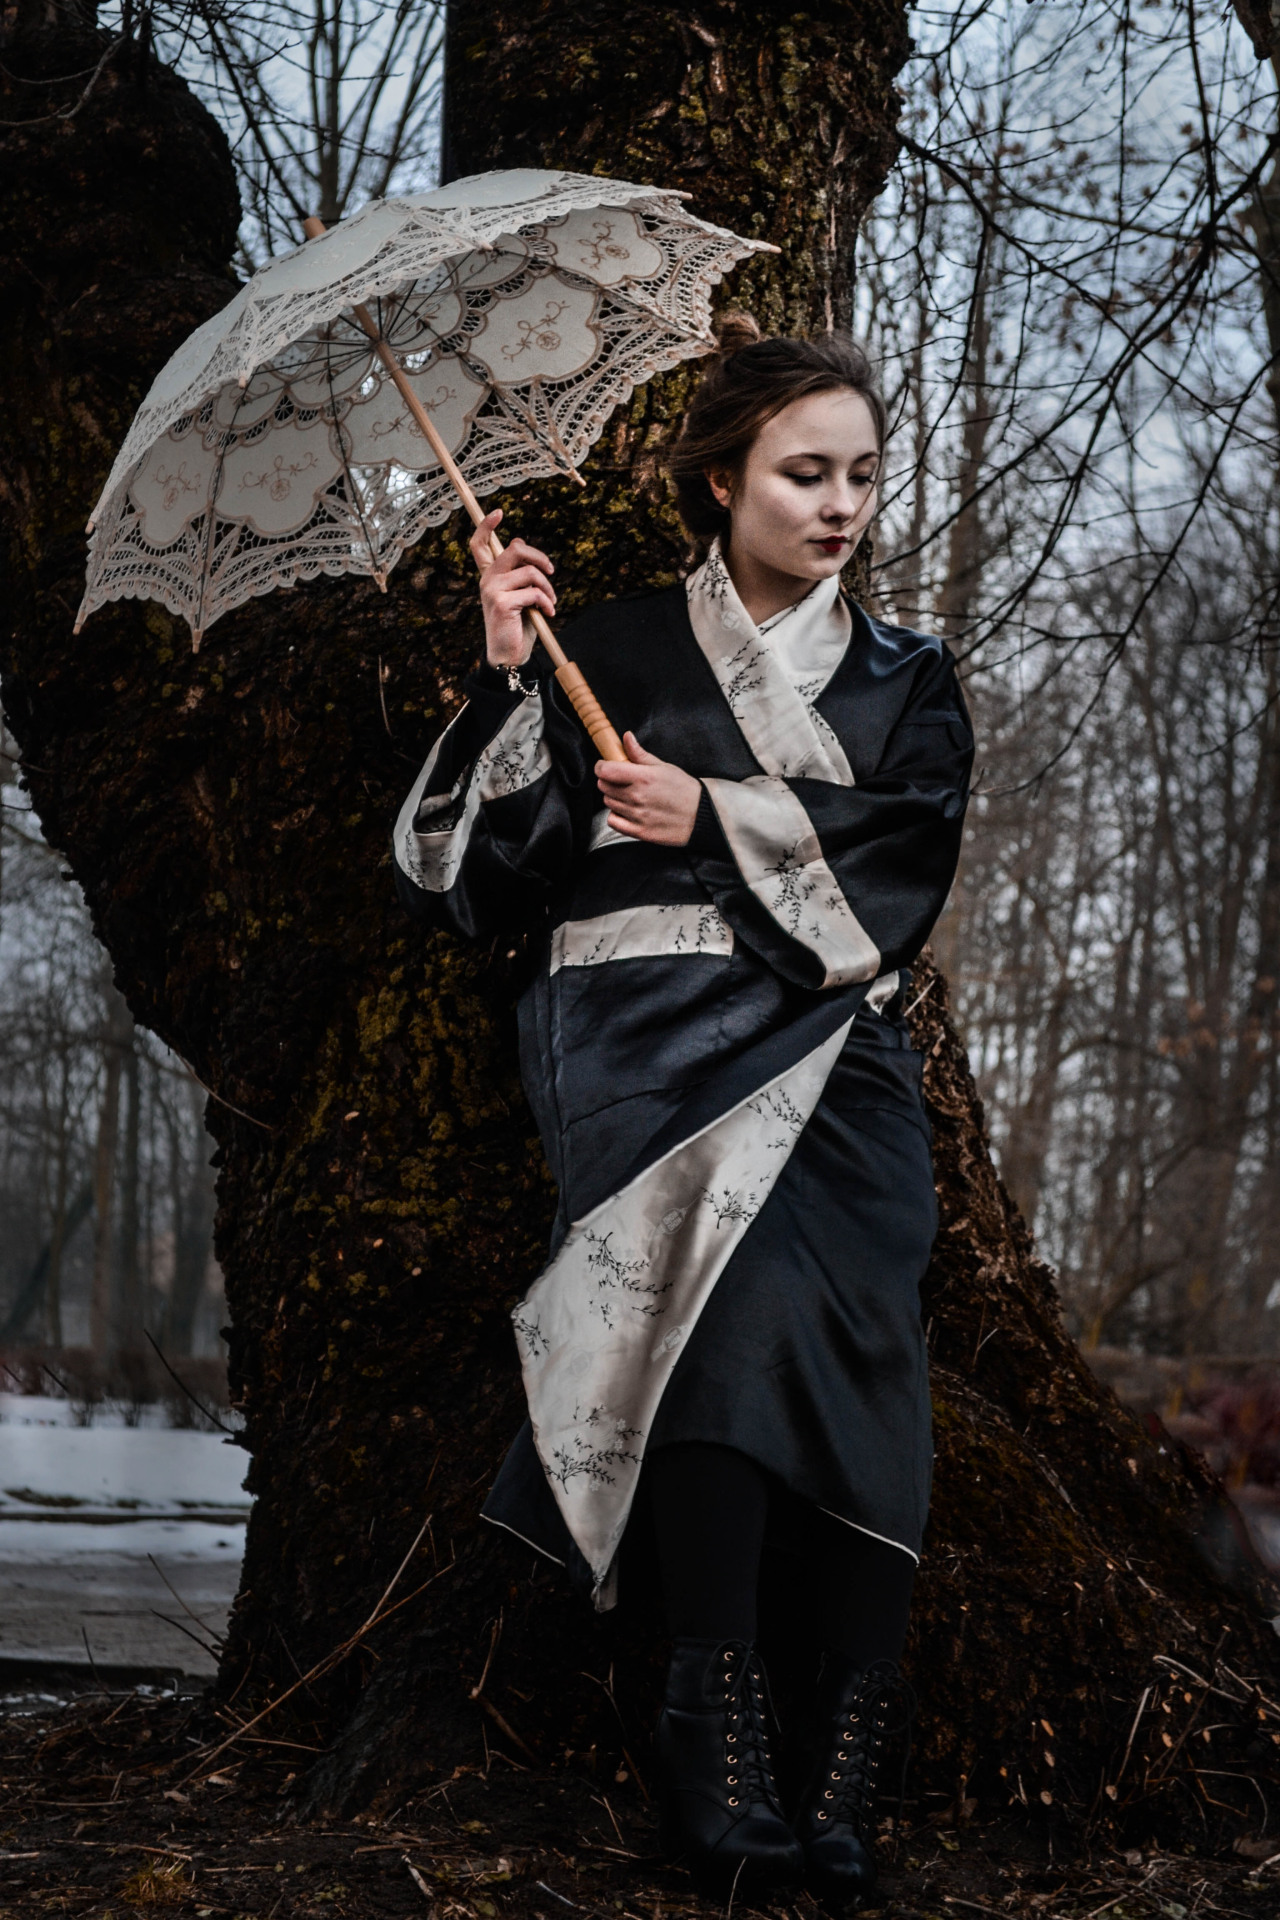 This is your reminder white people that using the geisha (read: what you think is a geisha) as an orientalist prop in your portrait photos is not only tired and unoriginal, it reiterates a type of fetishism and white supremacy that ultimately has...